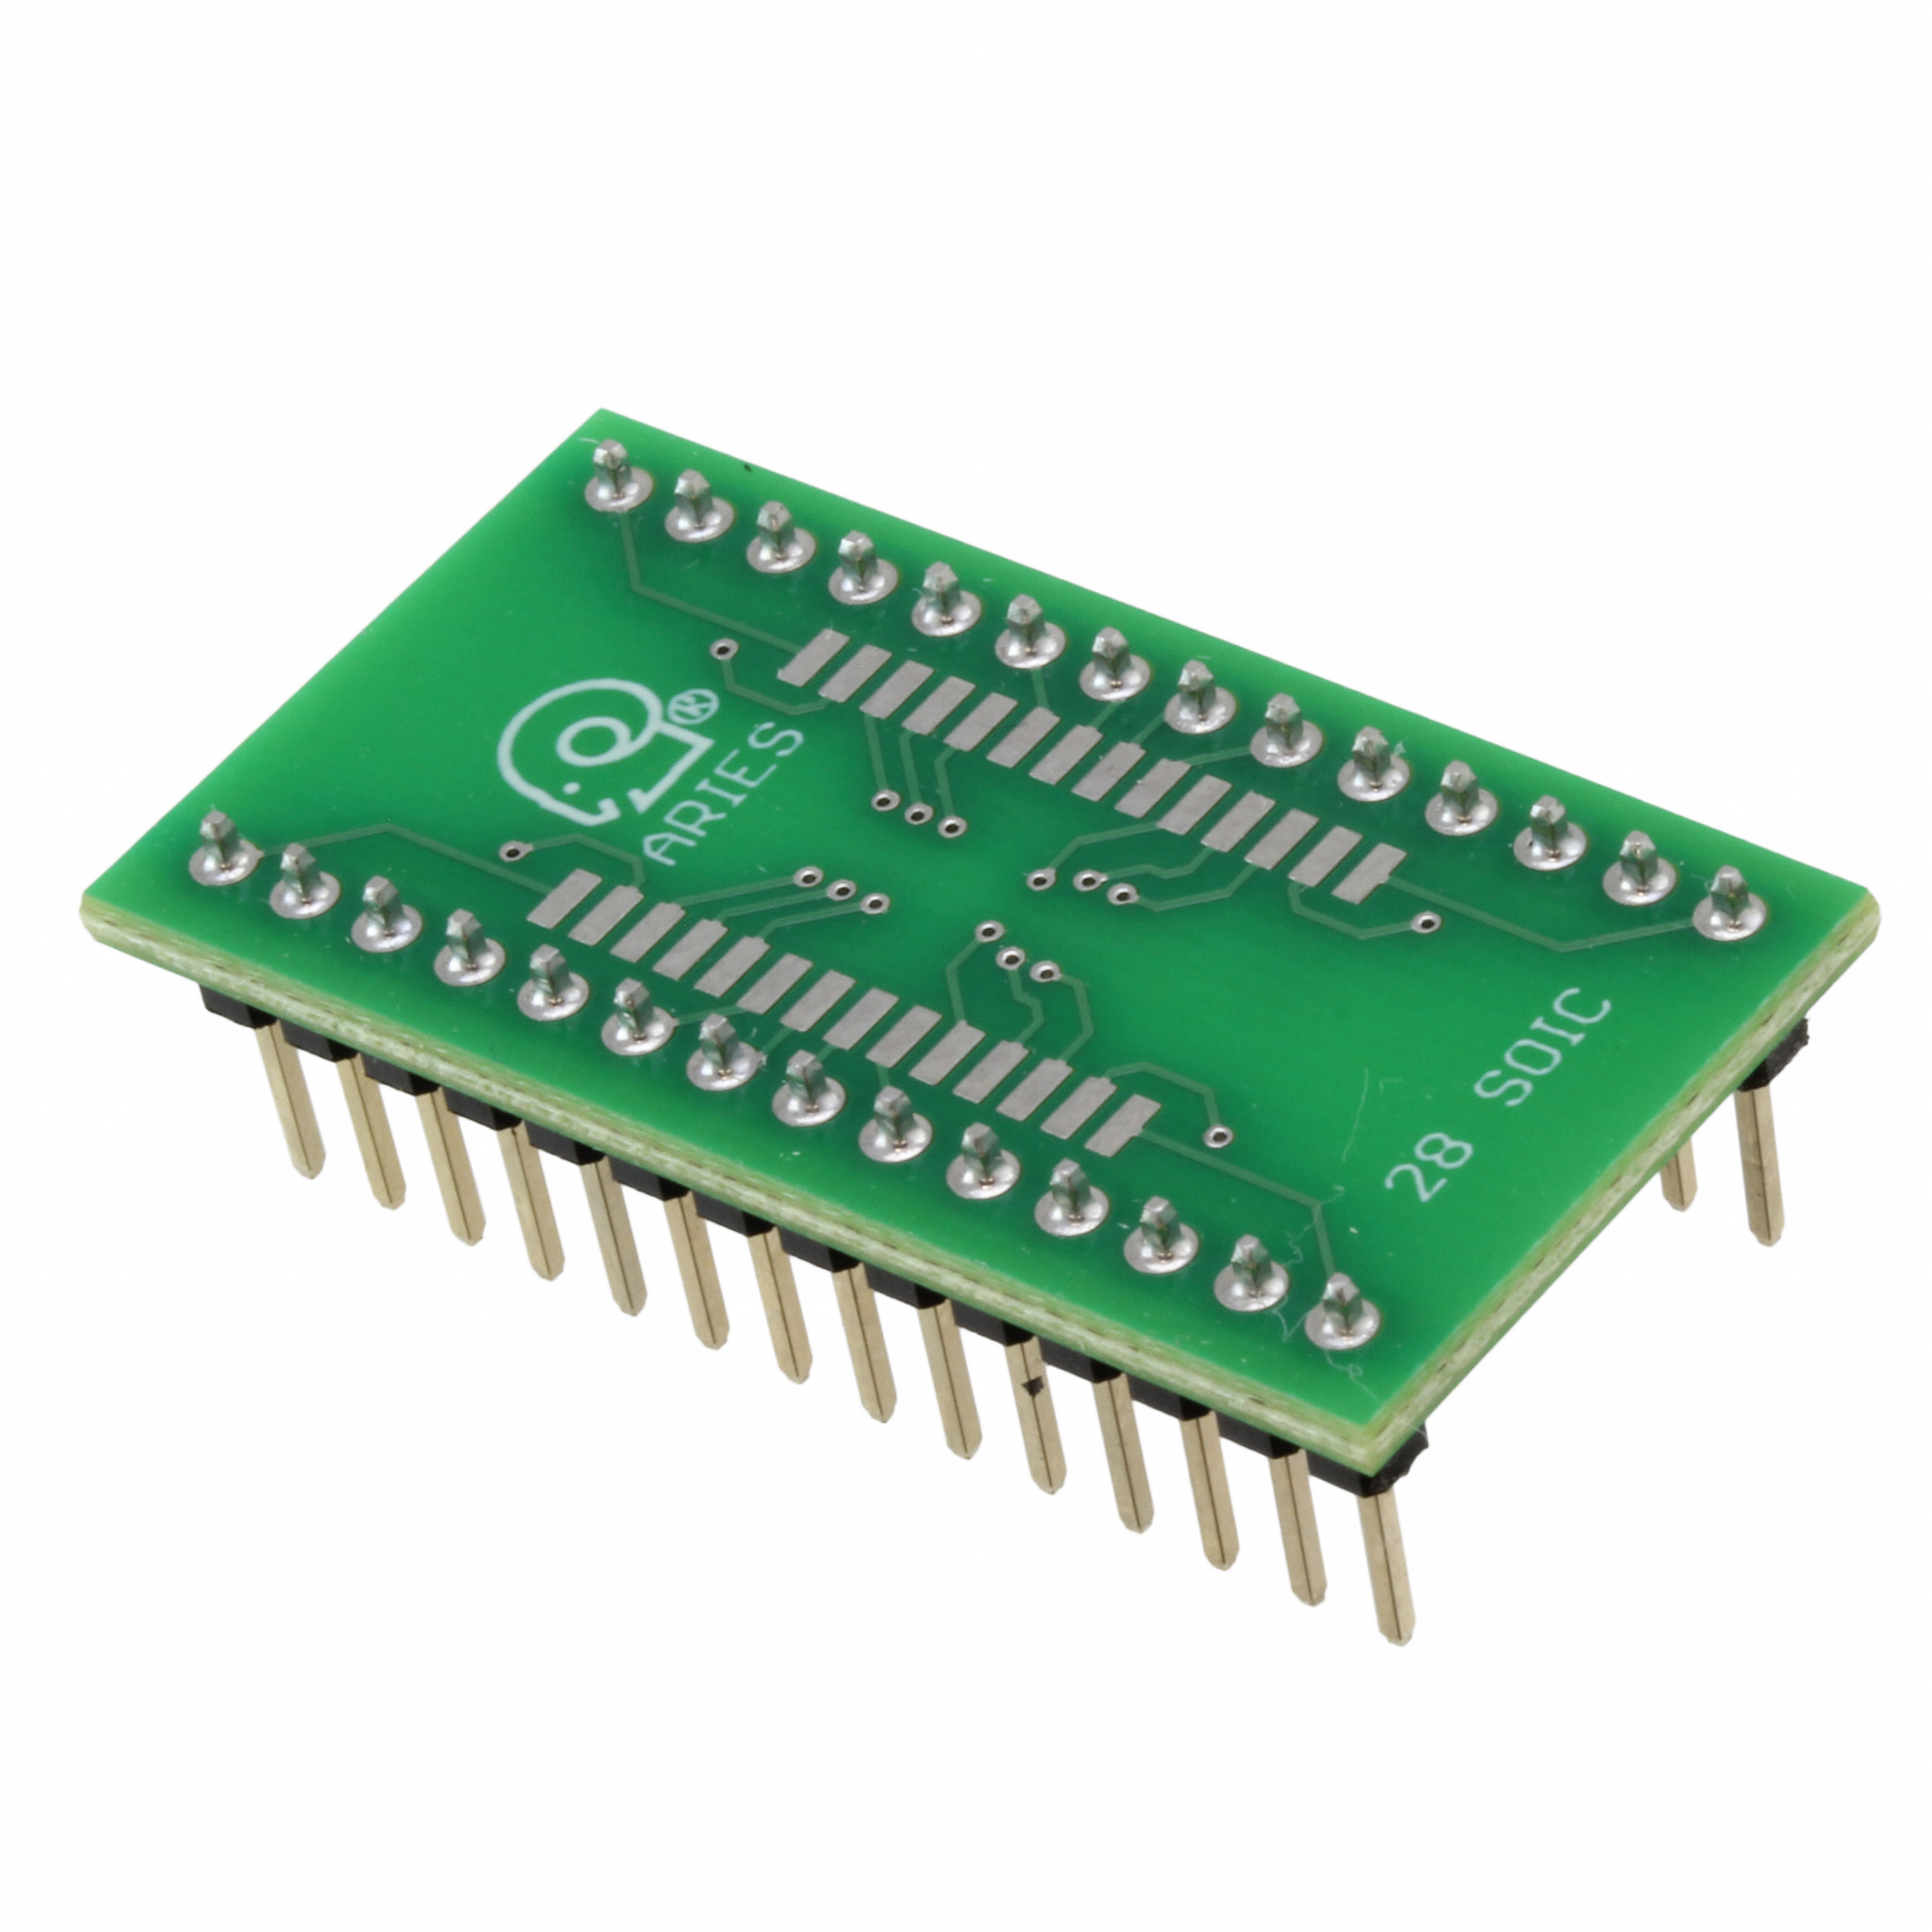 【LCQT-SOIC28】SOCKET ADAPTER SOIC TO 28DIP